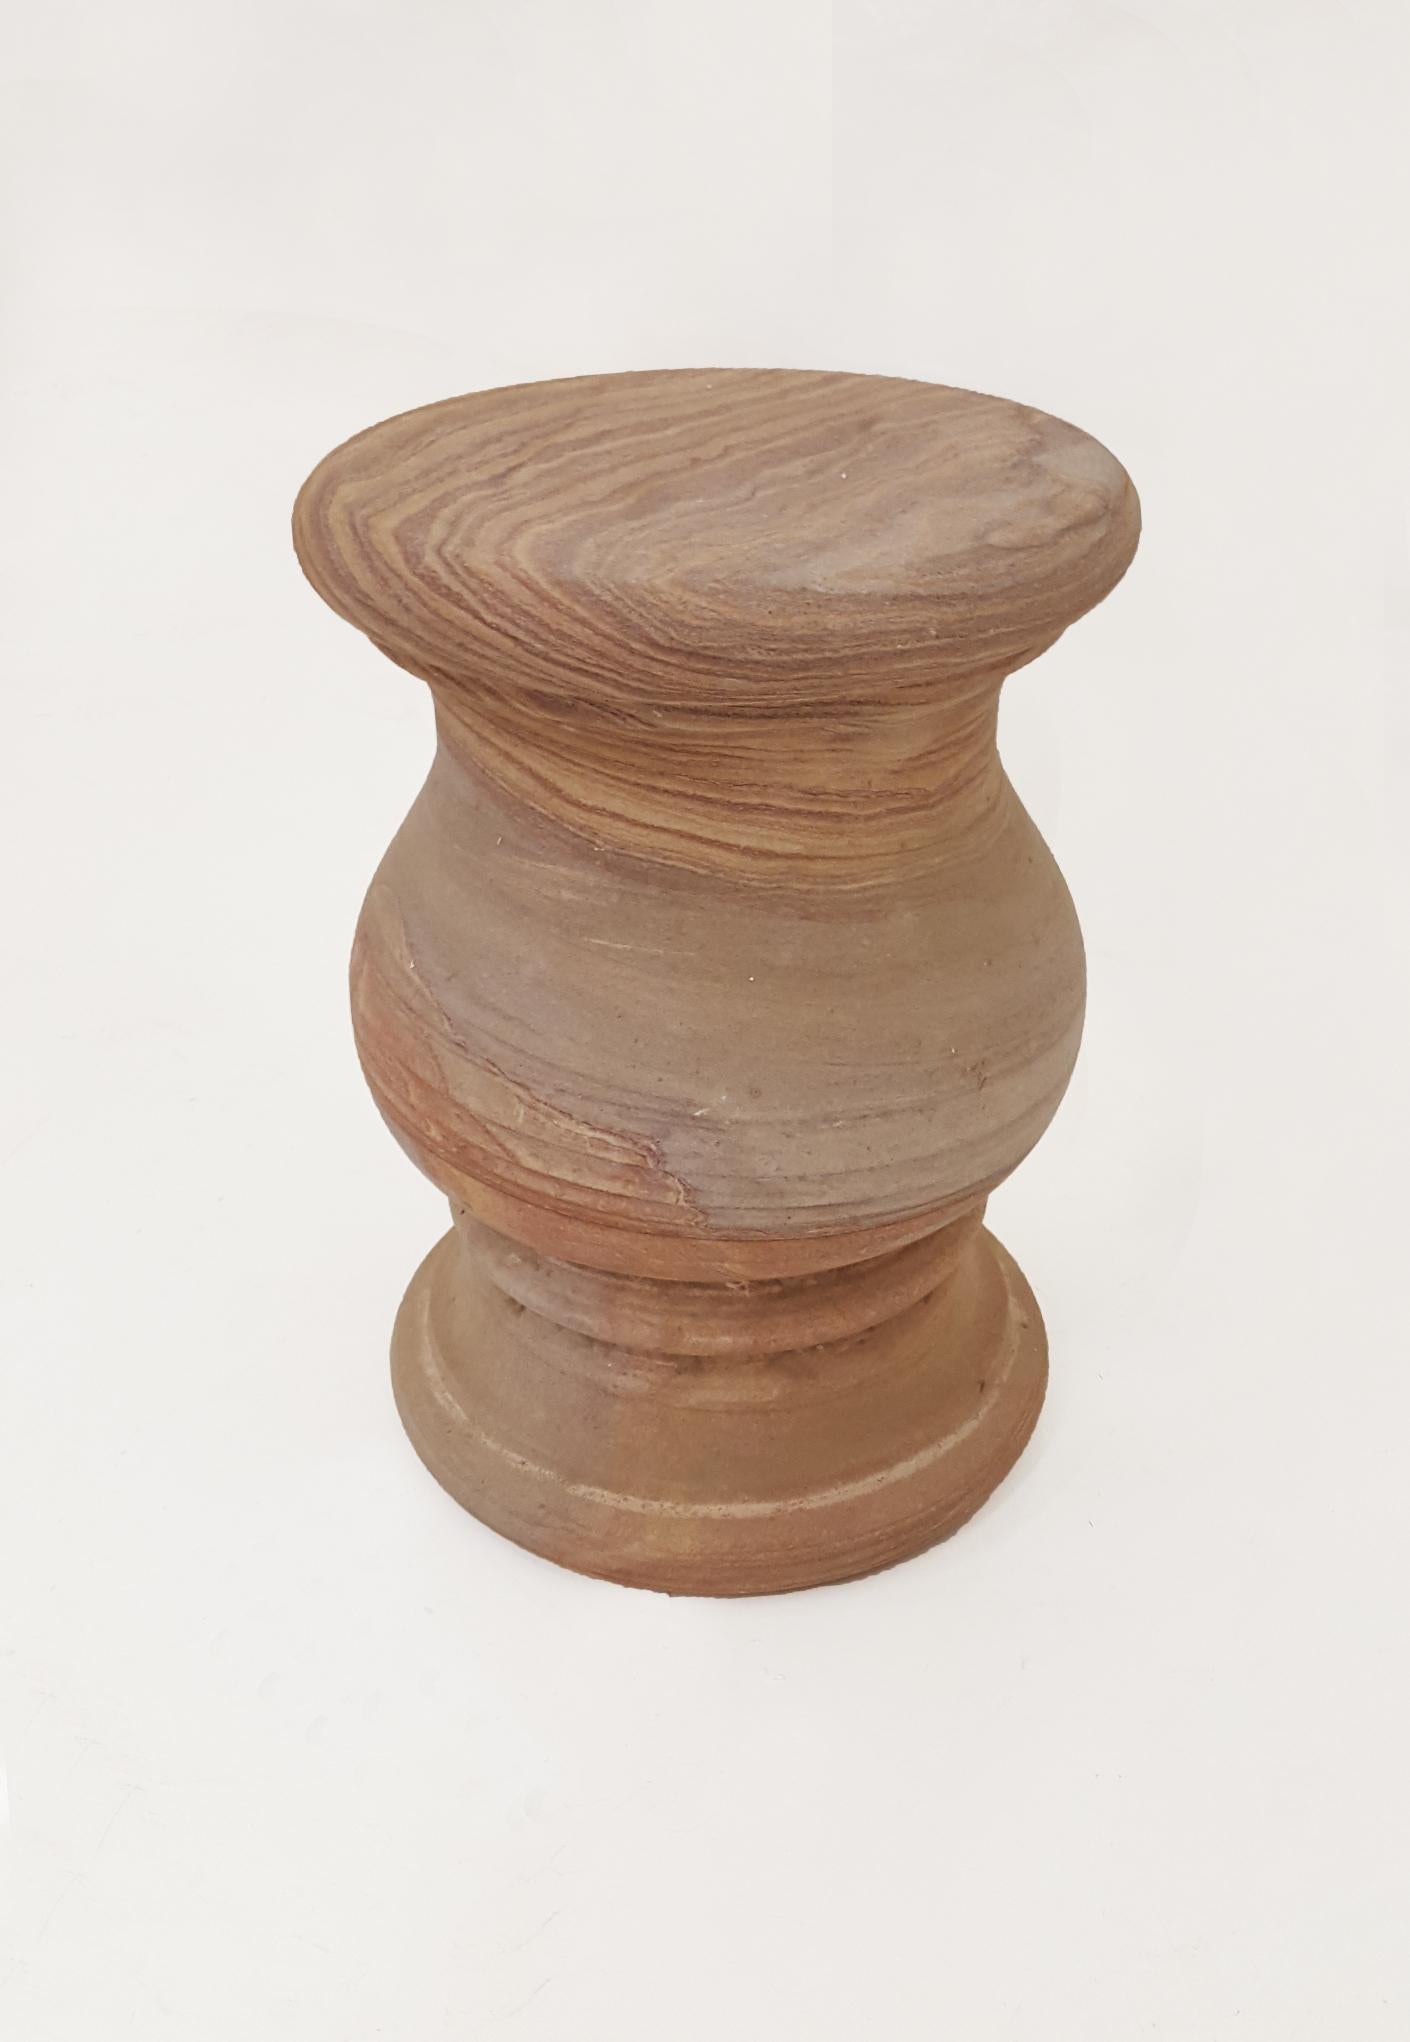 This simple round pedestal stands out when made in the rare and unique Rainbow Teakwood stone. An occasional piece, a side table, or a garden element, this versatile piece can fit wherever you like.
 

Round Pedestal Side Table
Size- 12